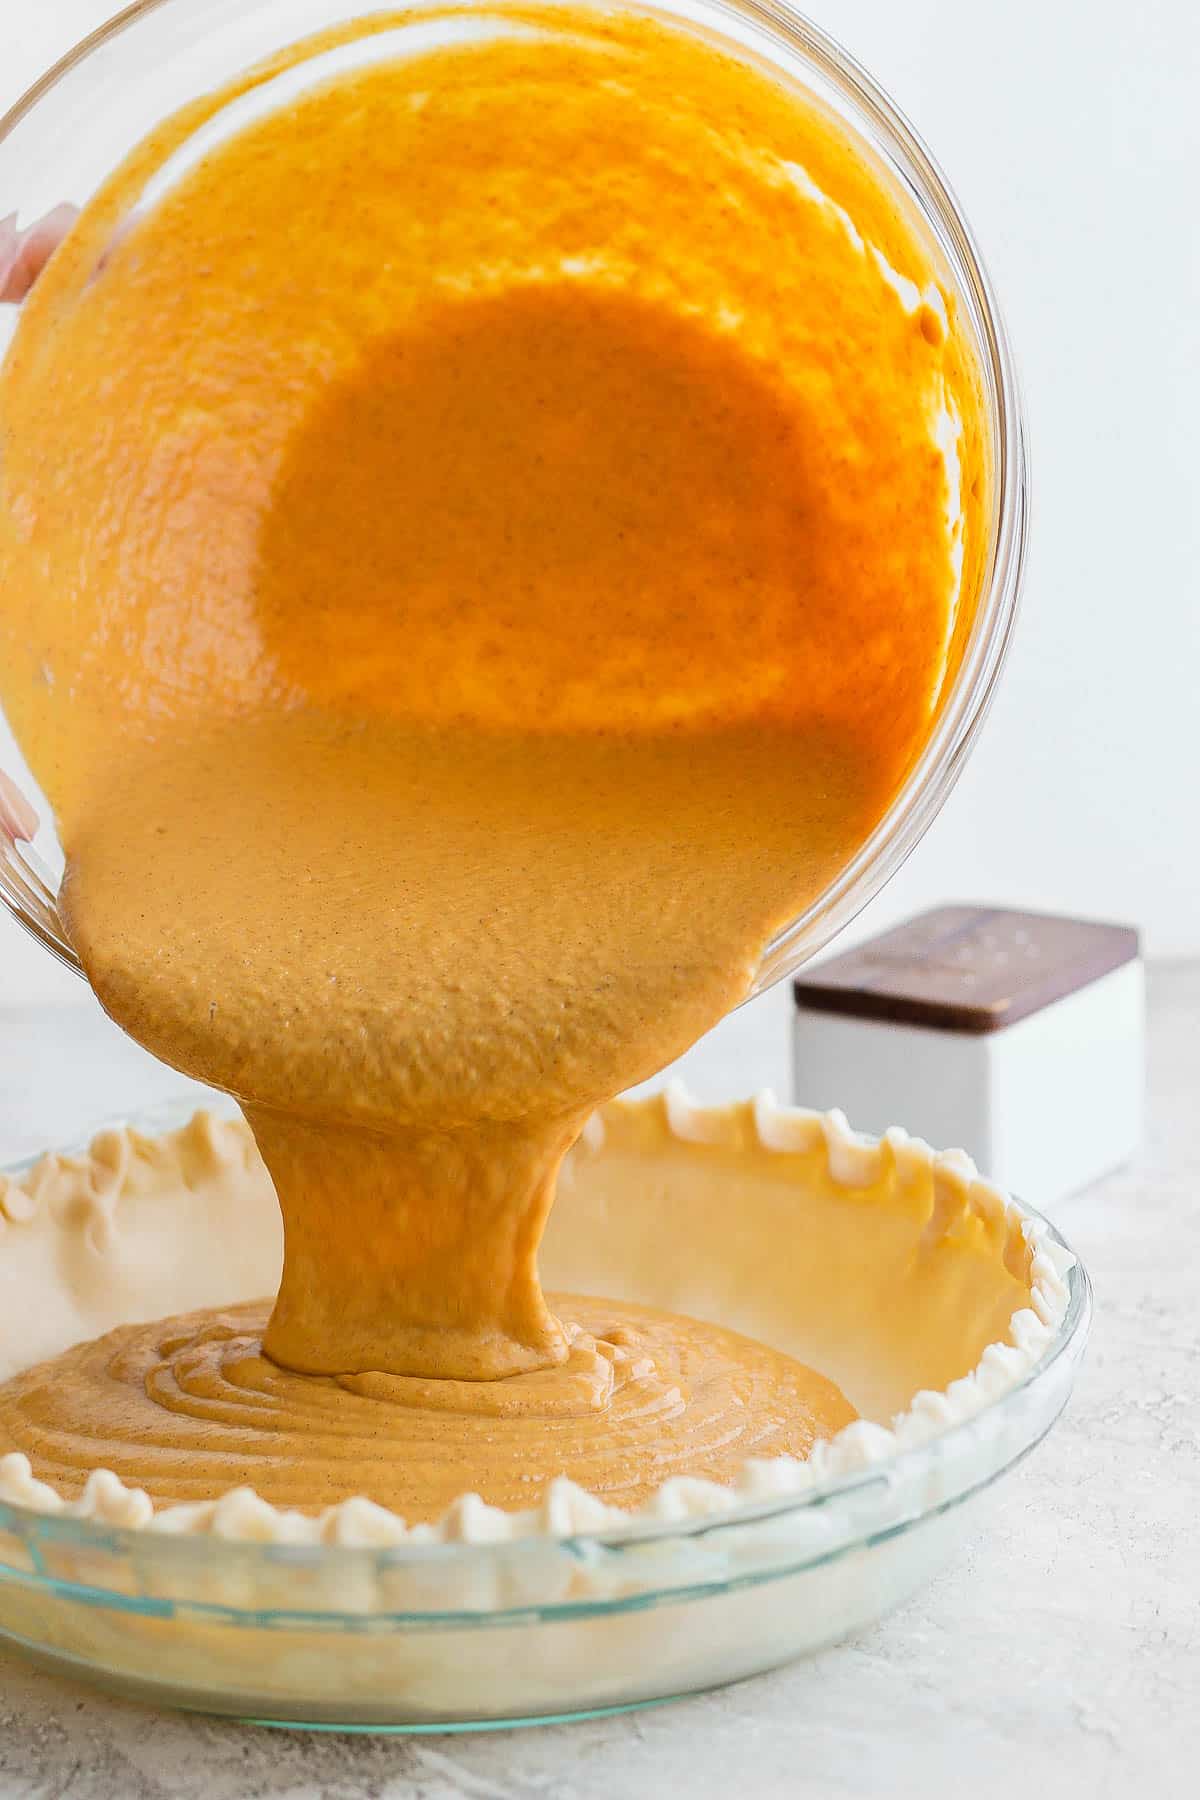 The fully mixed pumpkin pie filling being poured into a pie pan lined with the gluten free pie crust.